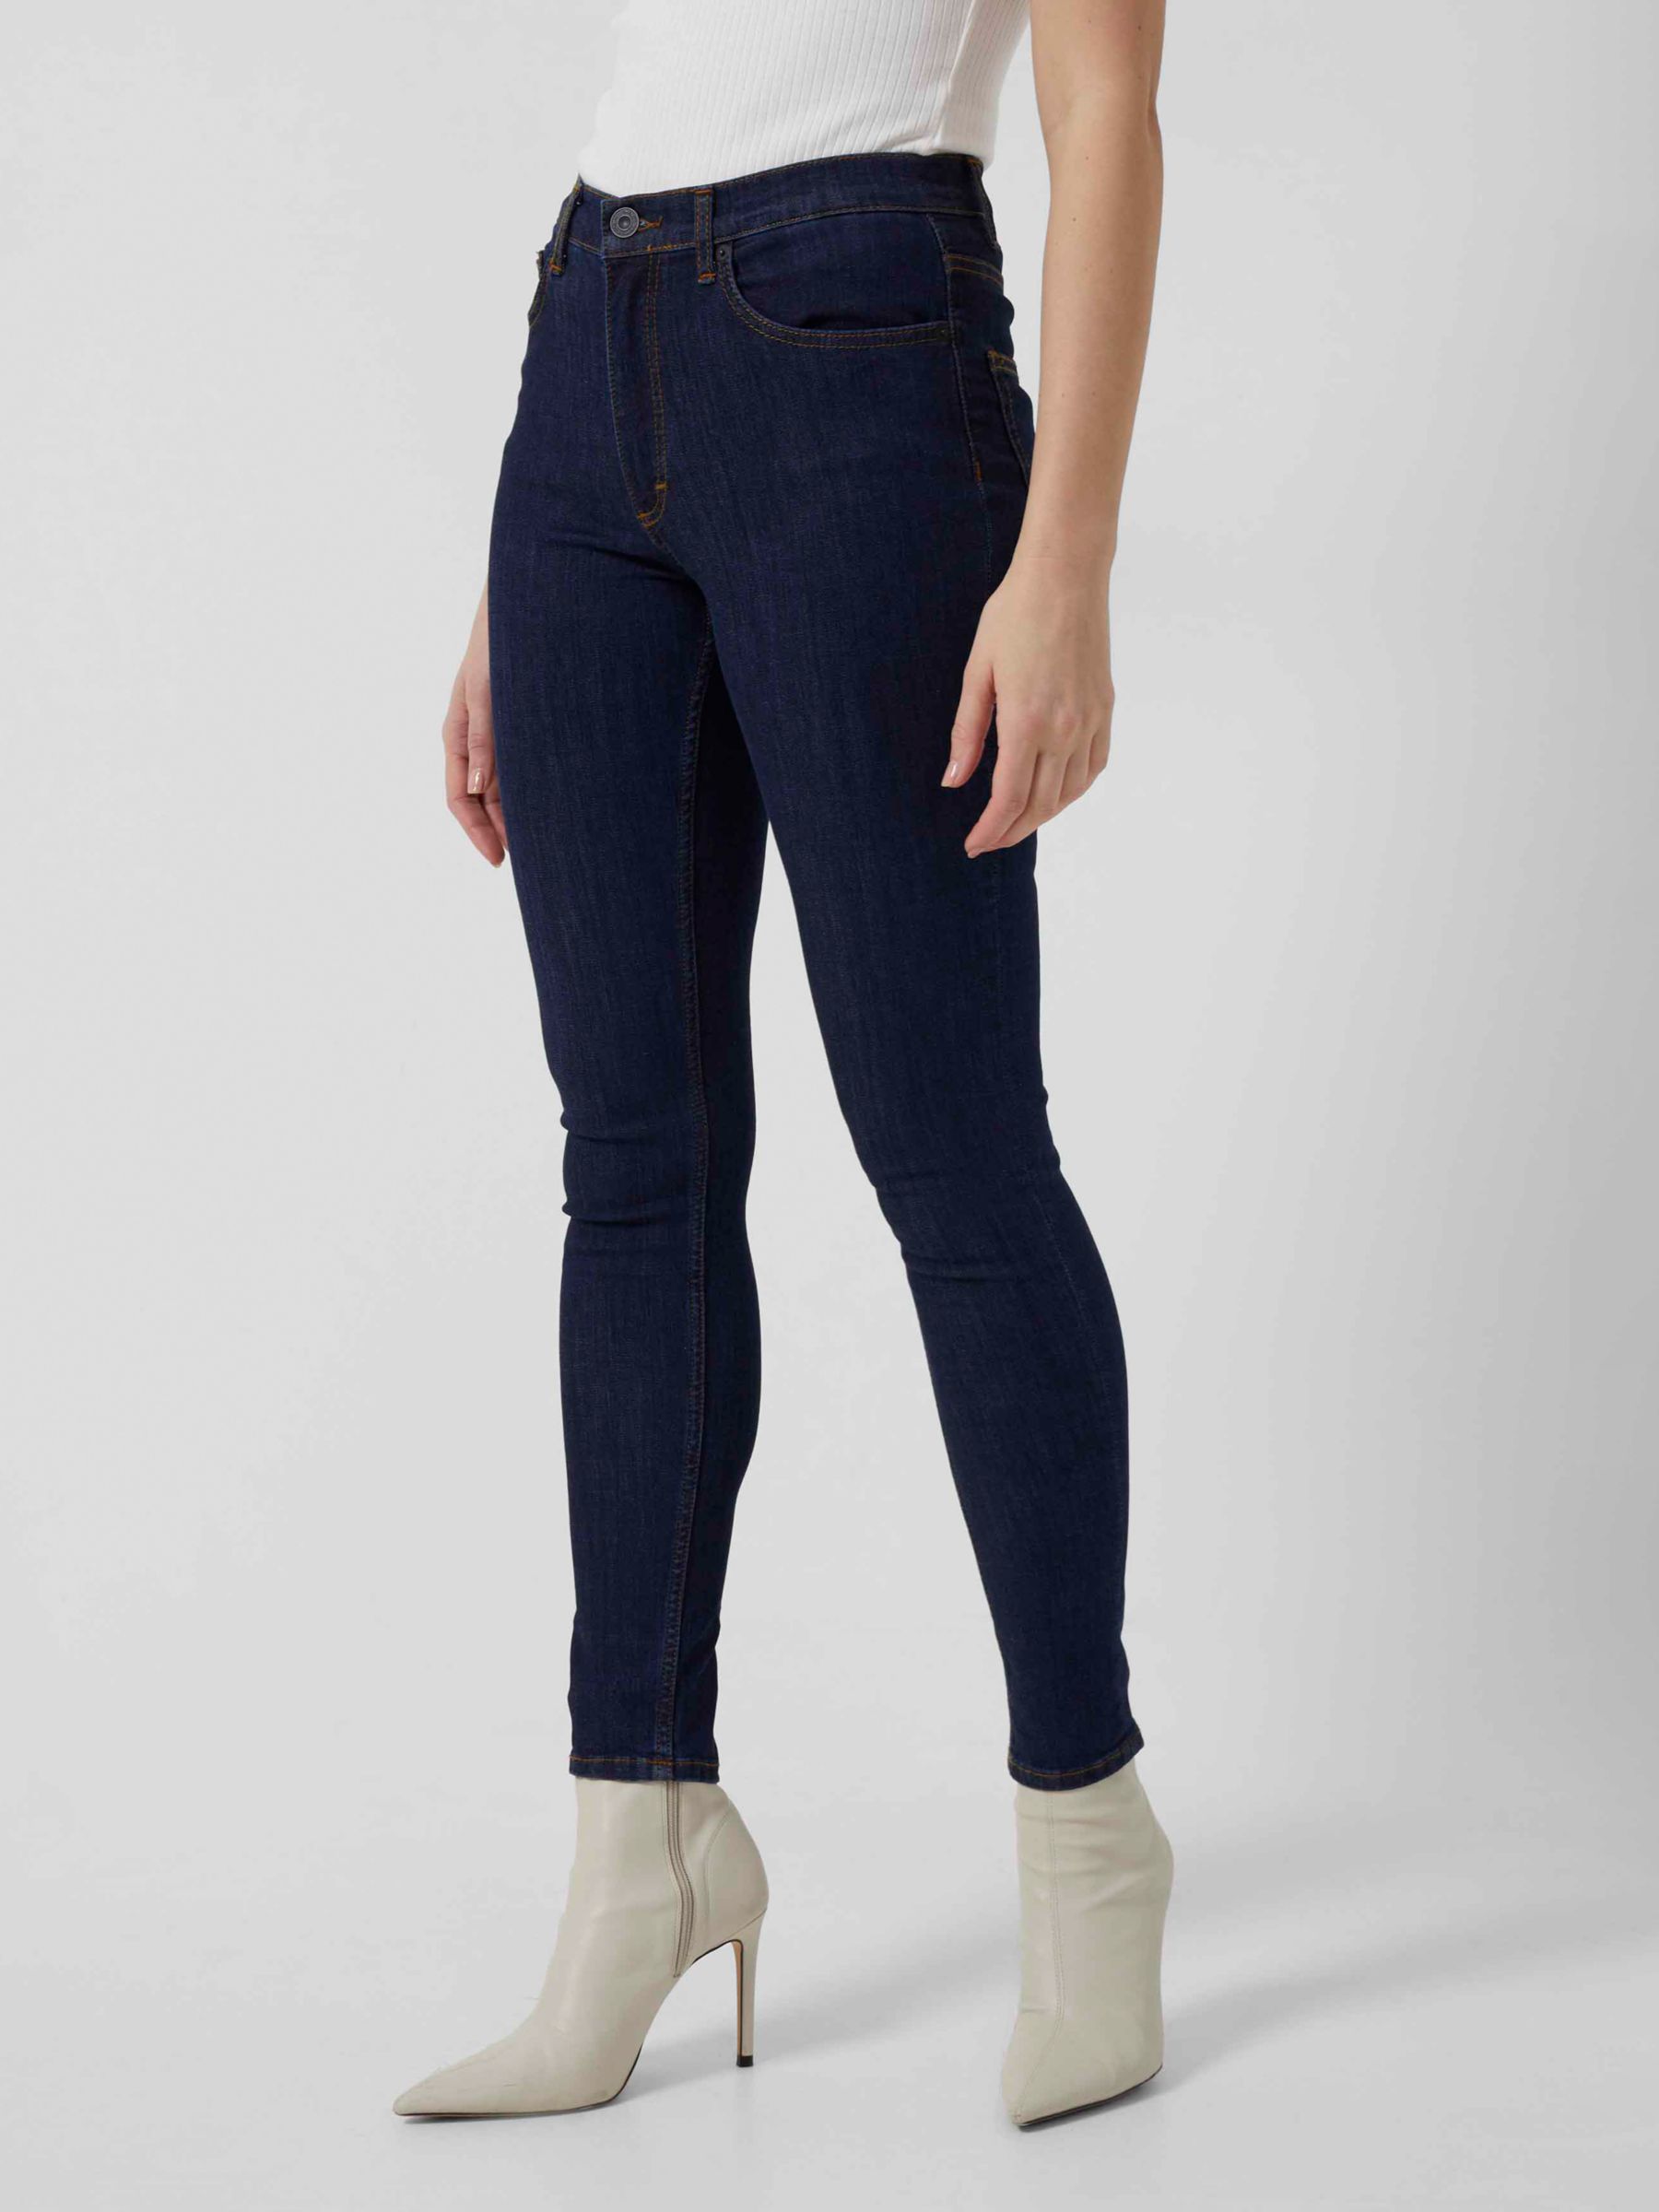 Buy French Connection Skinny Jeans, Blue/Black Online at johnlewis.com